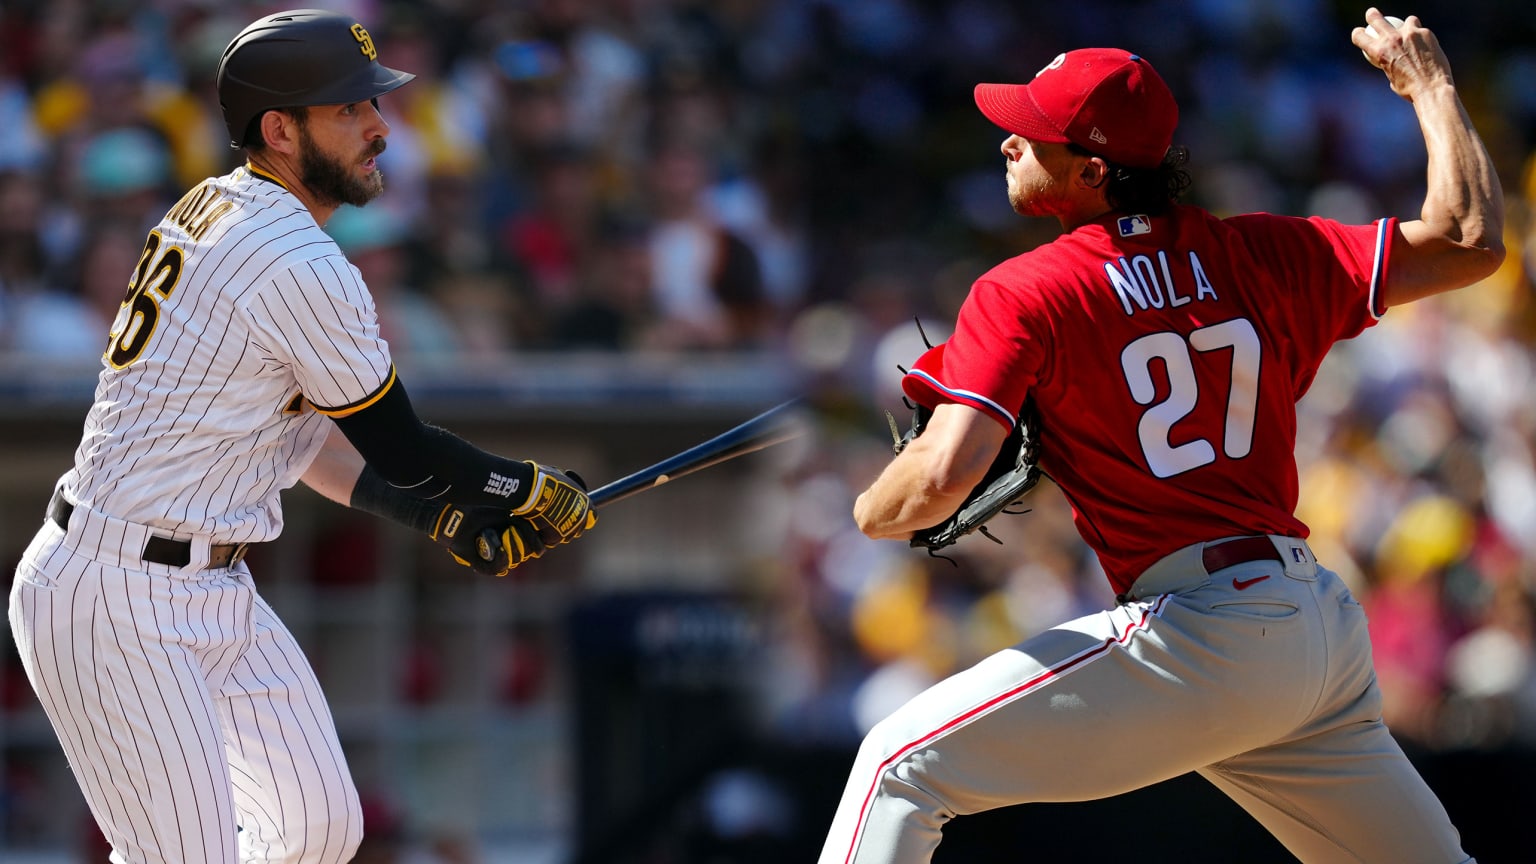 A photo illustration showing Austin Nola batting on the left and Aaron Nola pitching on the right